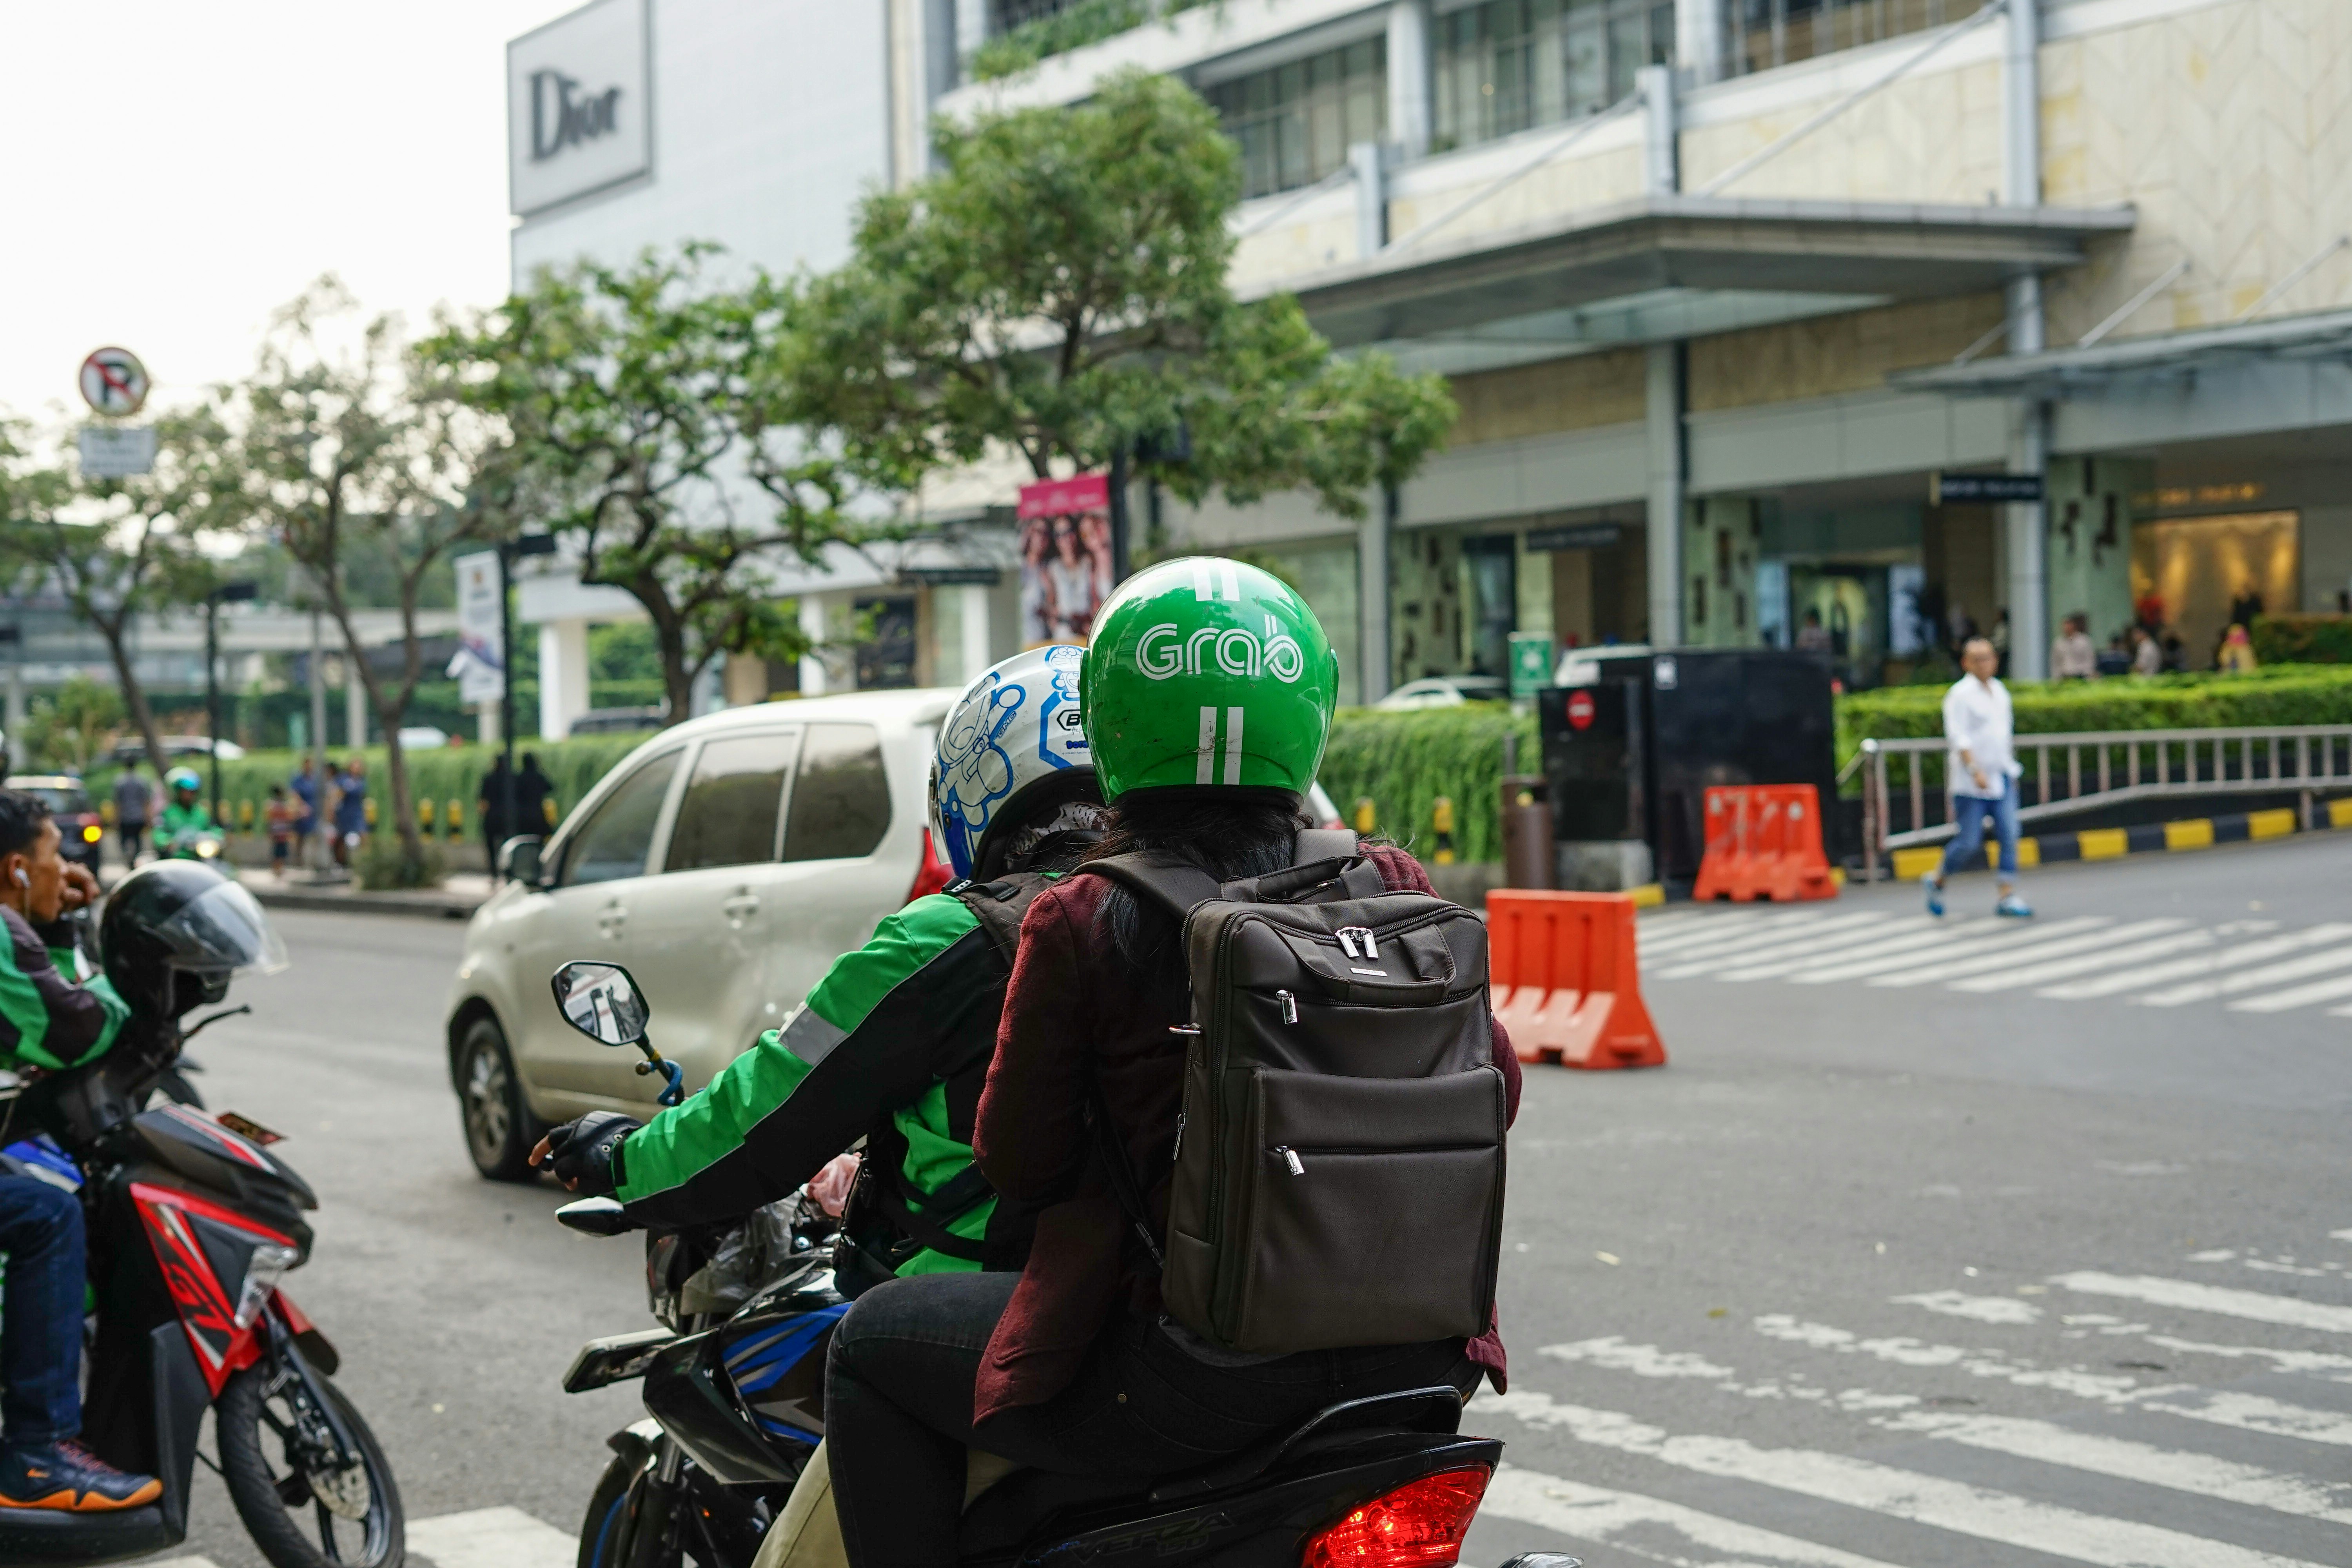 Grab Bike Driver picking up passenger. Grab is a technology company that offers wide range of ride-hailing and logistics services through its app in Southeast